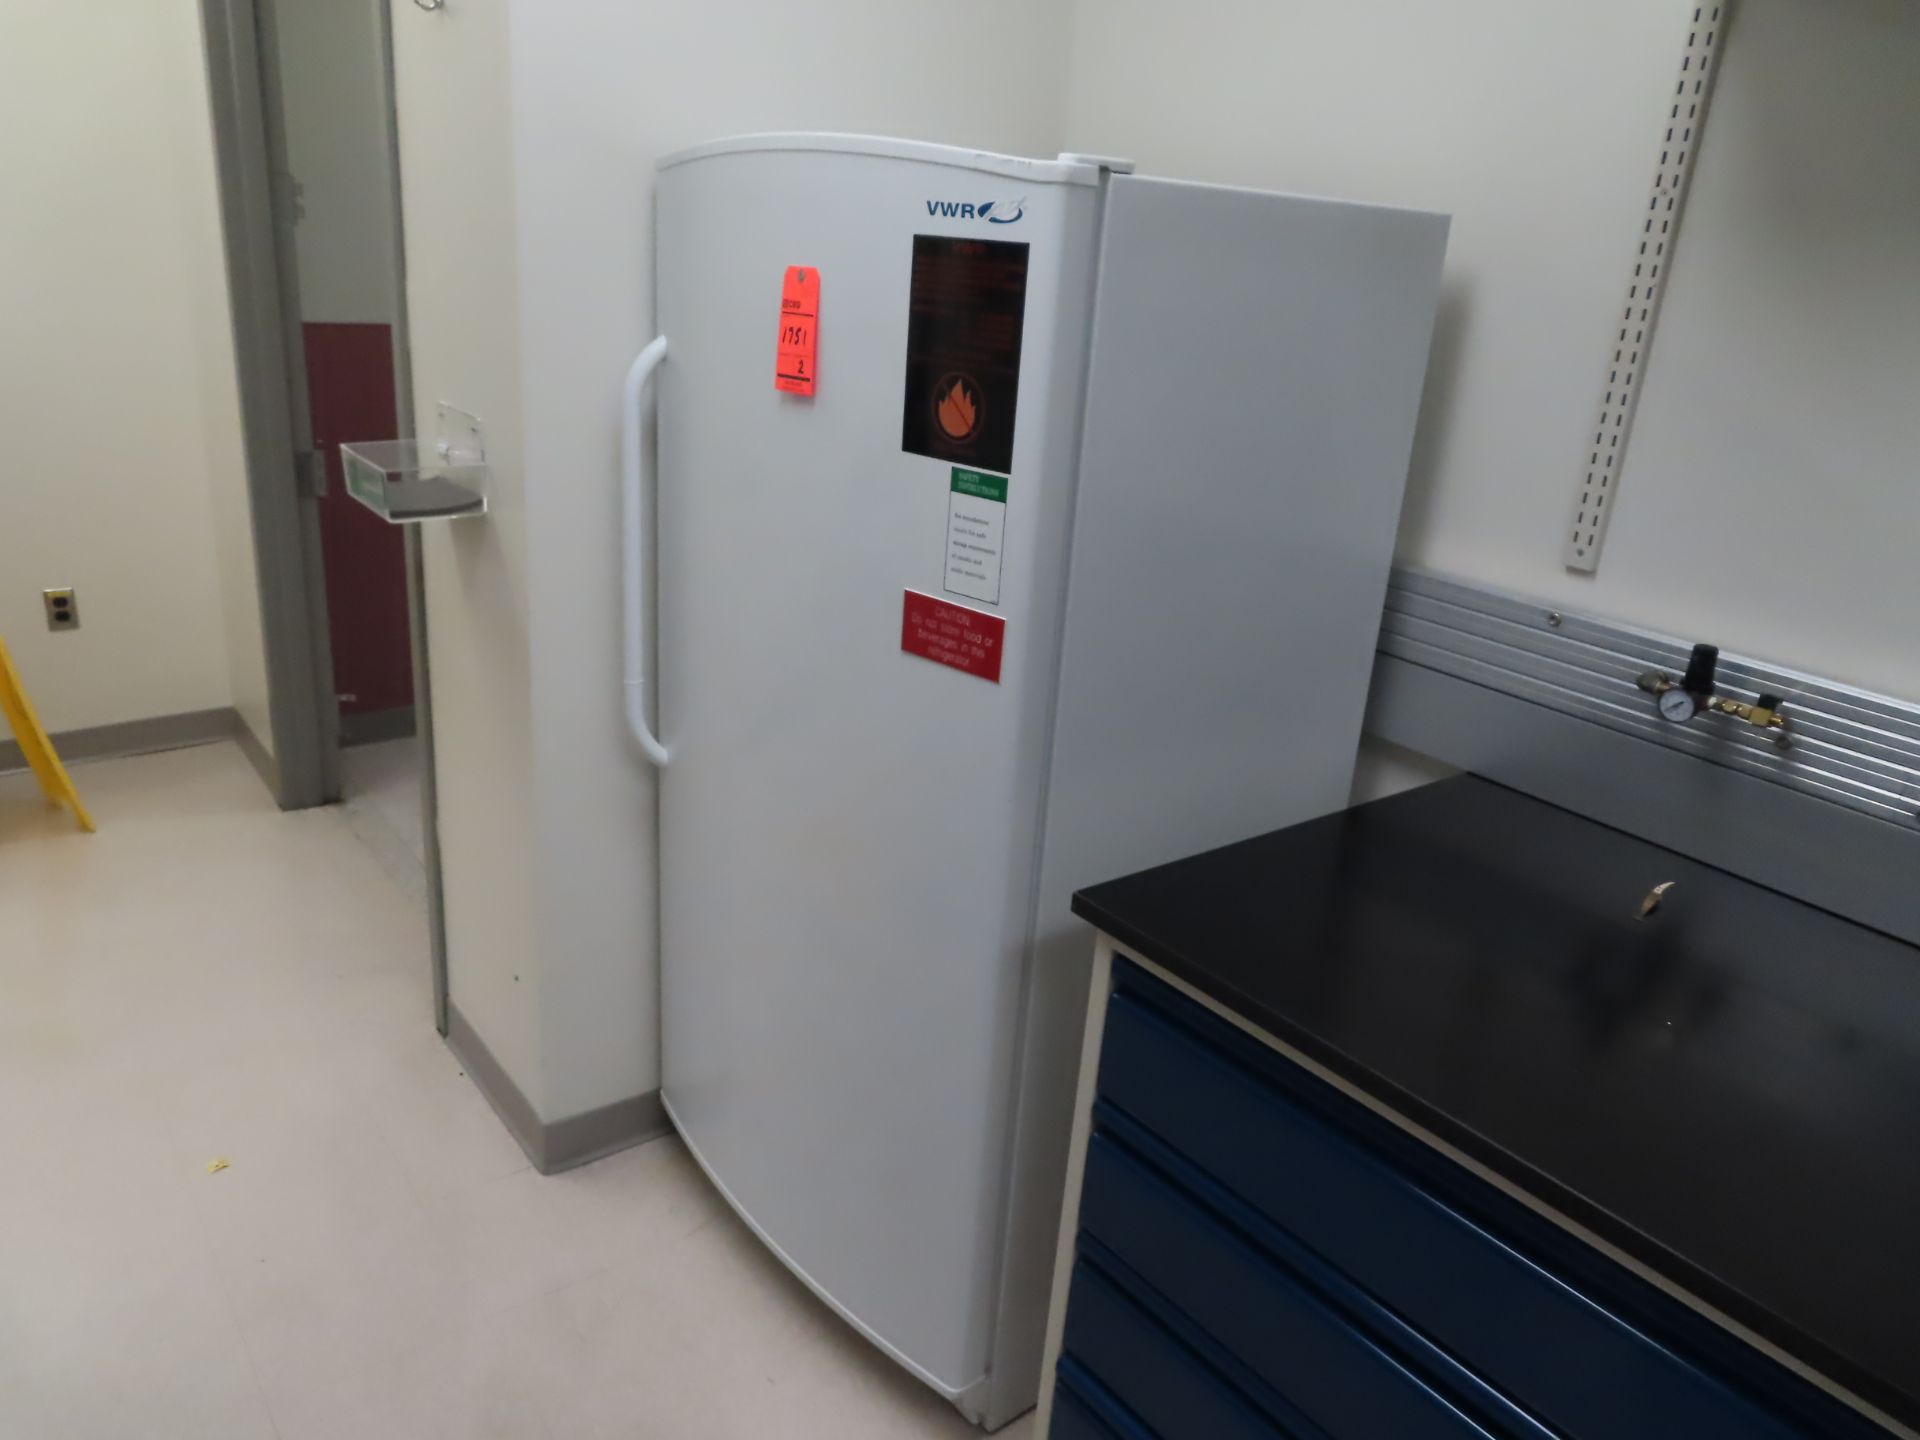 Lot including: (1) VWR flammable material storage refrigerator, (1) Puffer Hubbard lab freezer, - Image 3 of 4